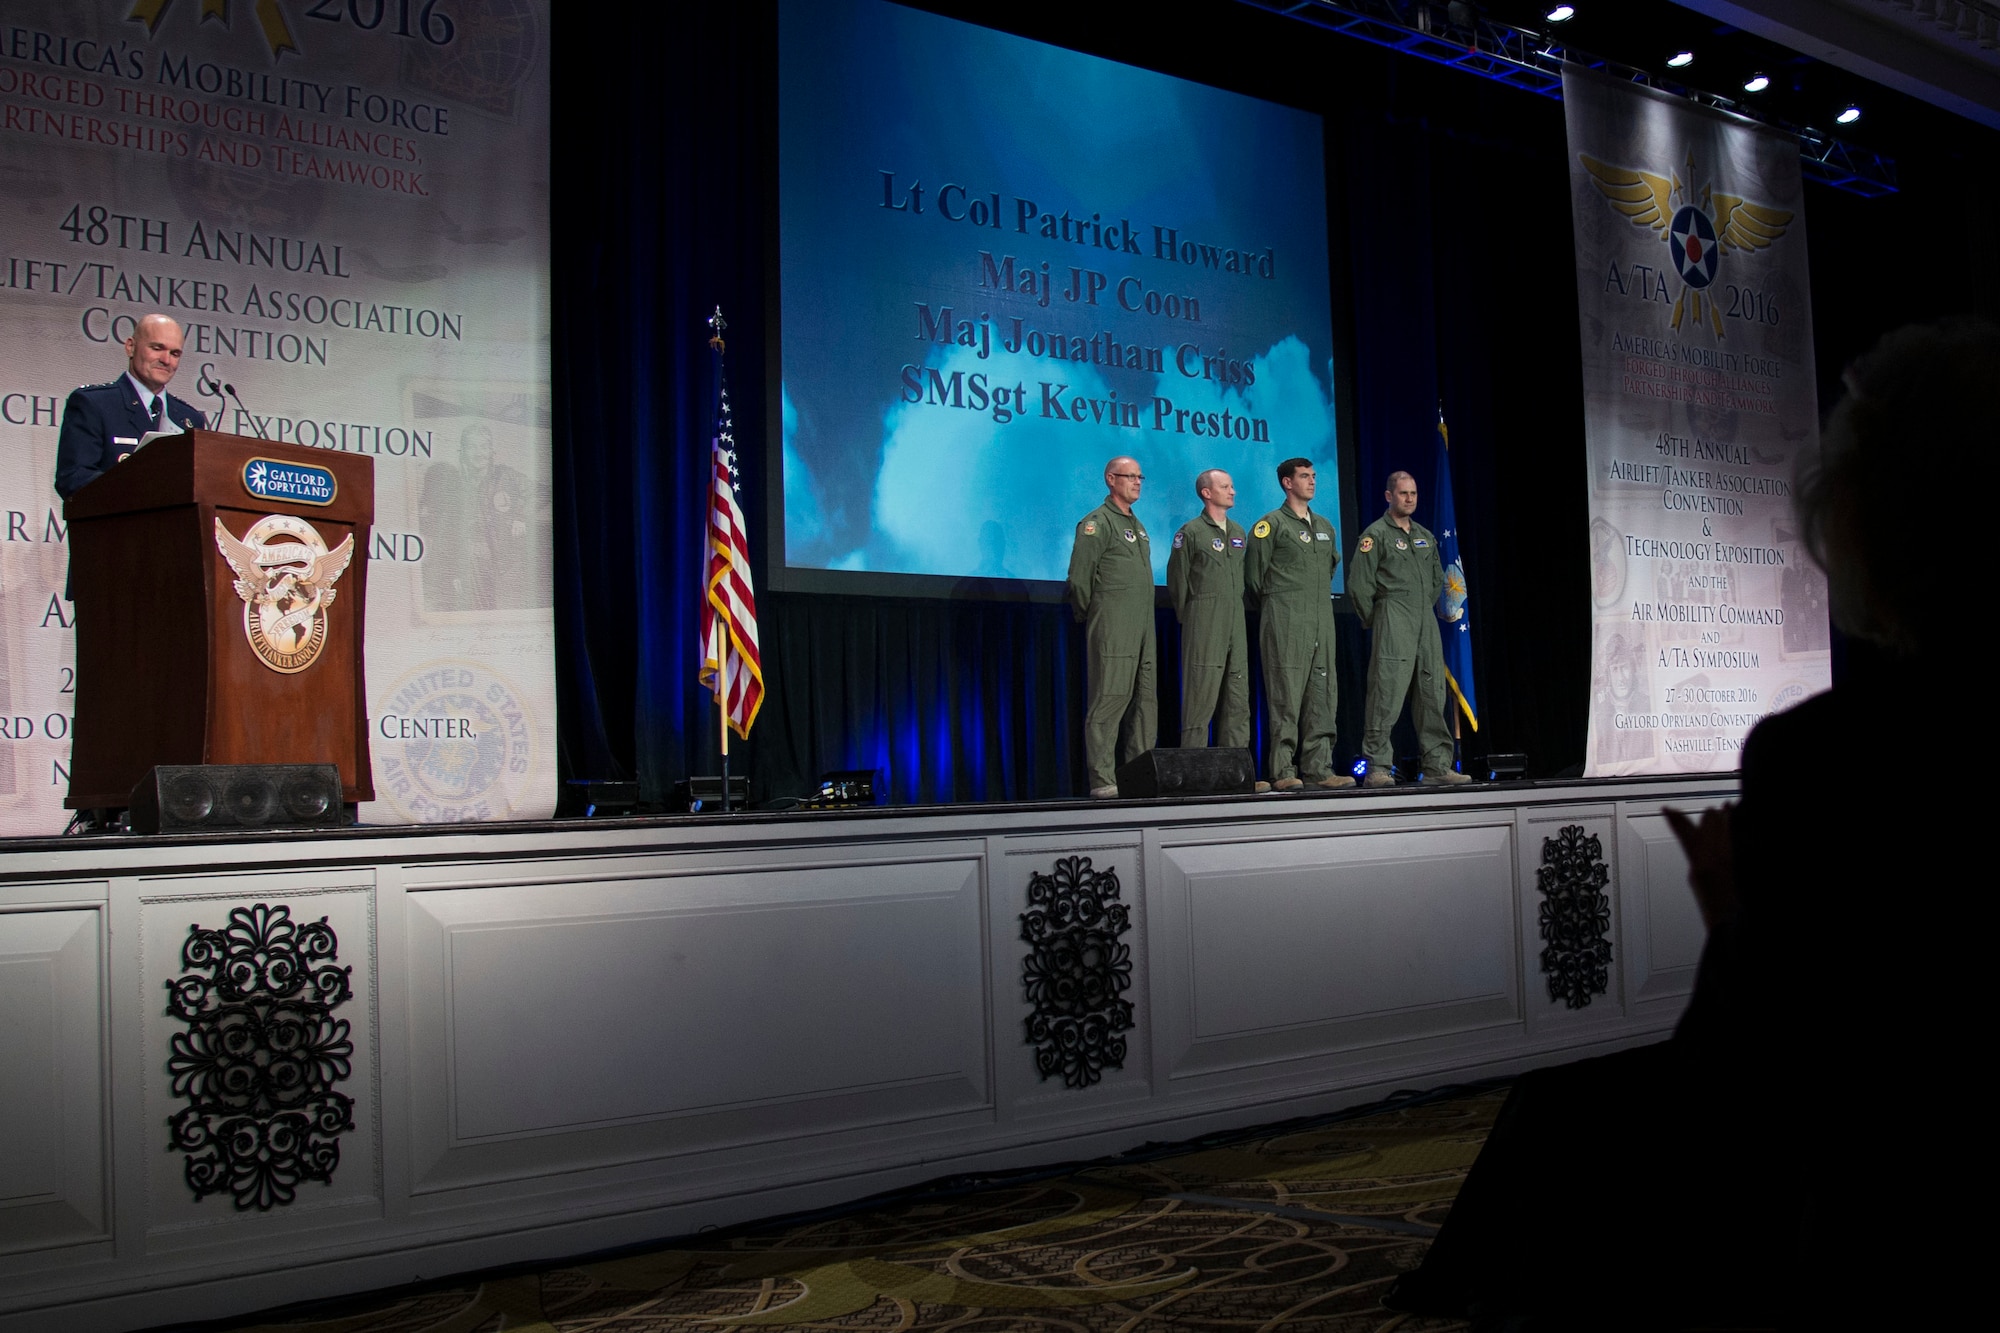 Gen. Carlton D. Everhart II, the Air Mobility Command commander, recognizes four individuals from an aeromedical evacuation team during the 48th Air Mobility Command and Airlift/Tanker Association Symposium in Nashville, Tennessee, Oct. 29, 2016. In 2010, the team transported a U.S. Marine Sergeant from Afghanistan to the U.S. to receive medical care after he suffered injuries from an improvised explosive device while on patrol. (U.S. Air Force photo by Airman 1st Class Melissa Estevez)